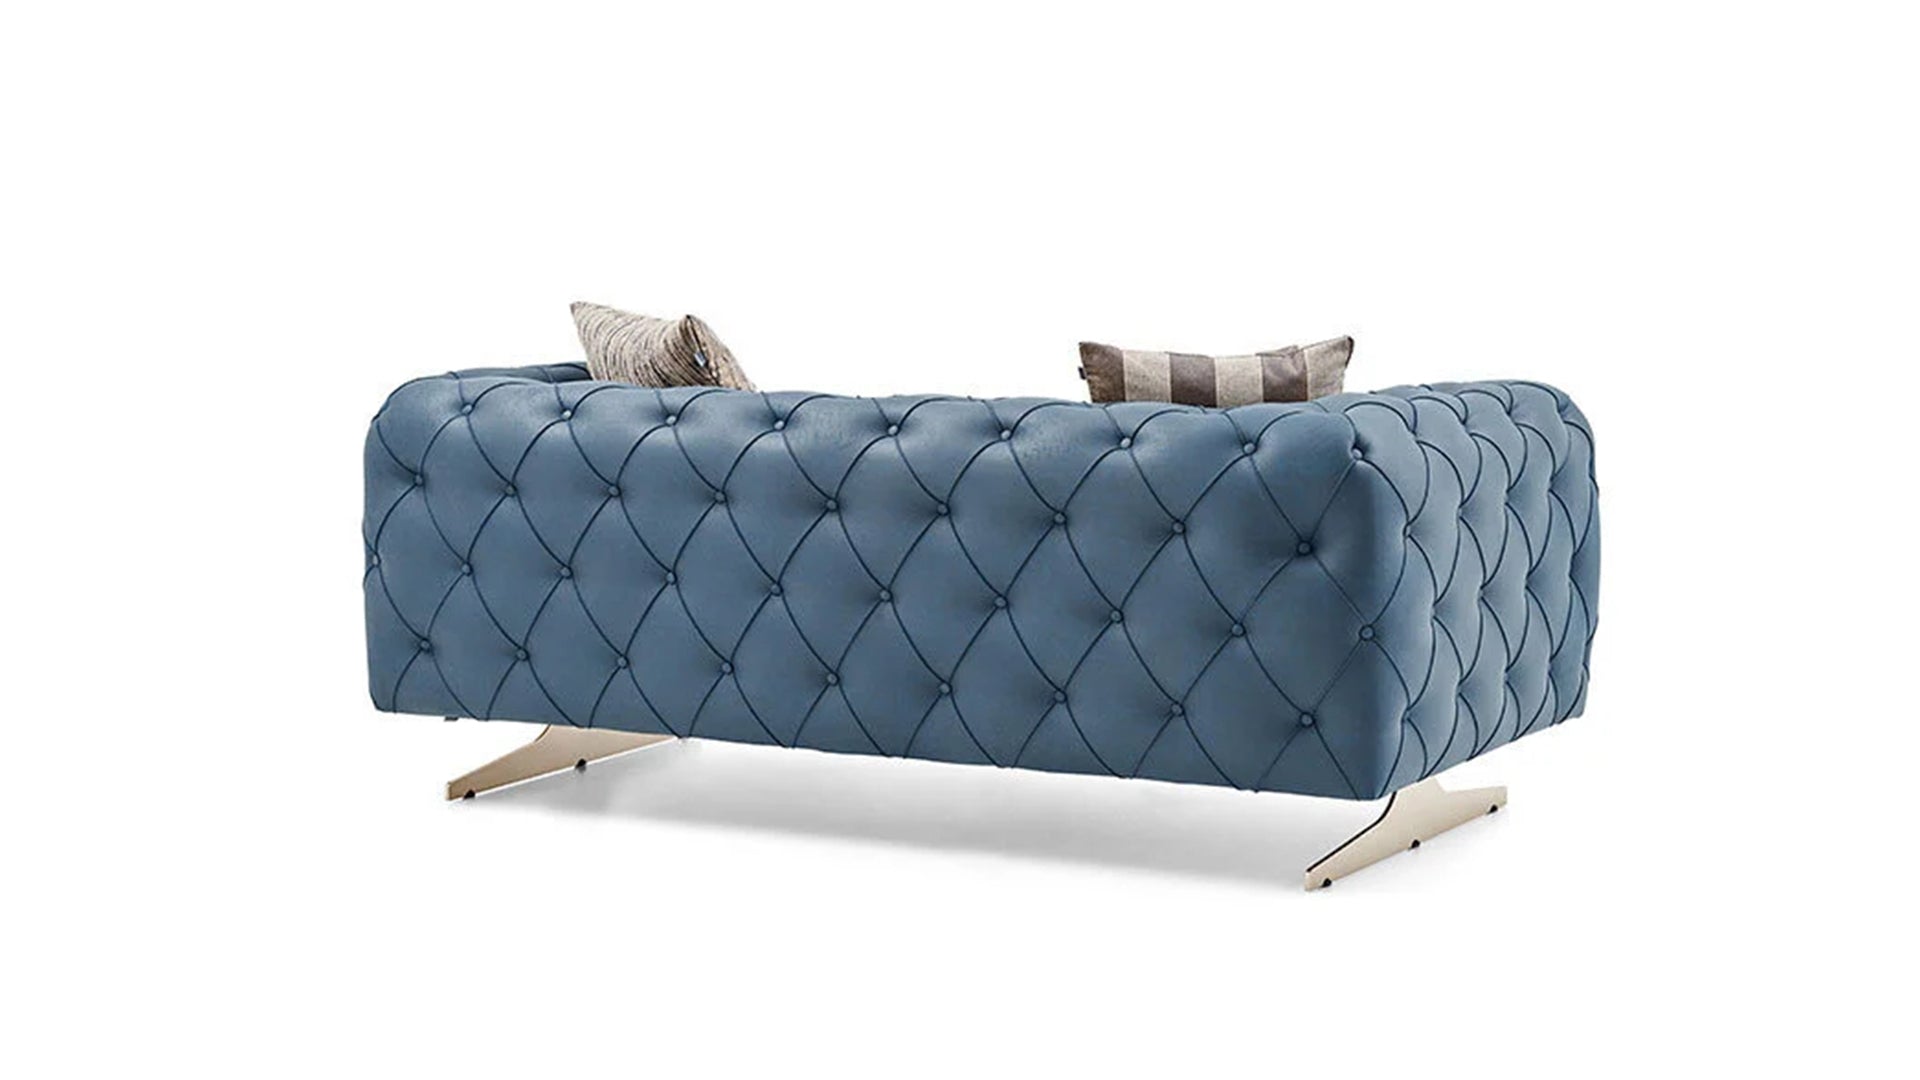 Allegra 2 Seater Quilted Sofa